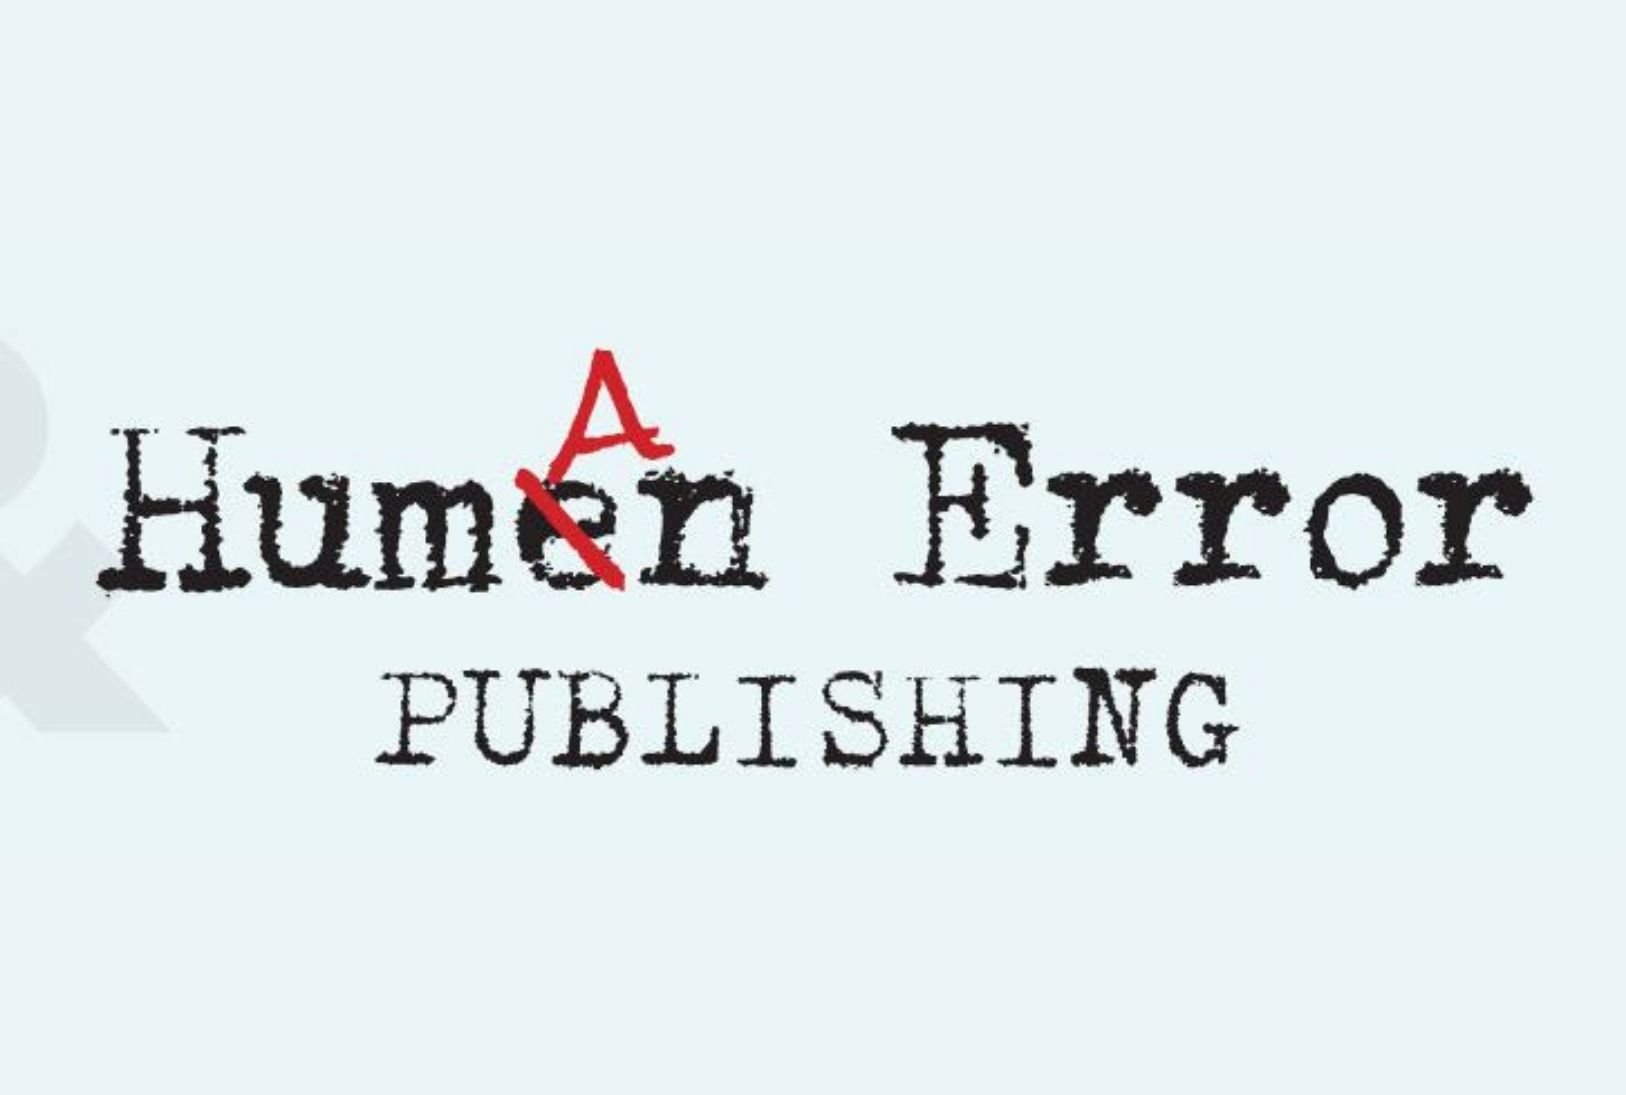 A Human Error Publishing Poetry Event